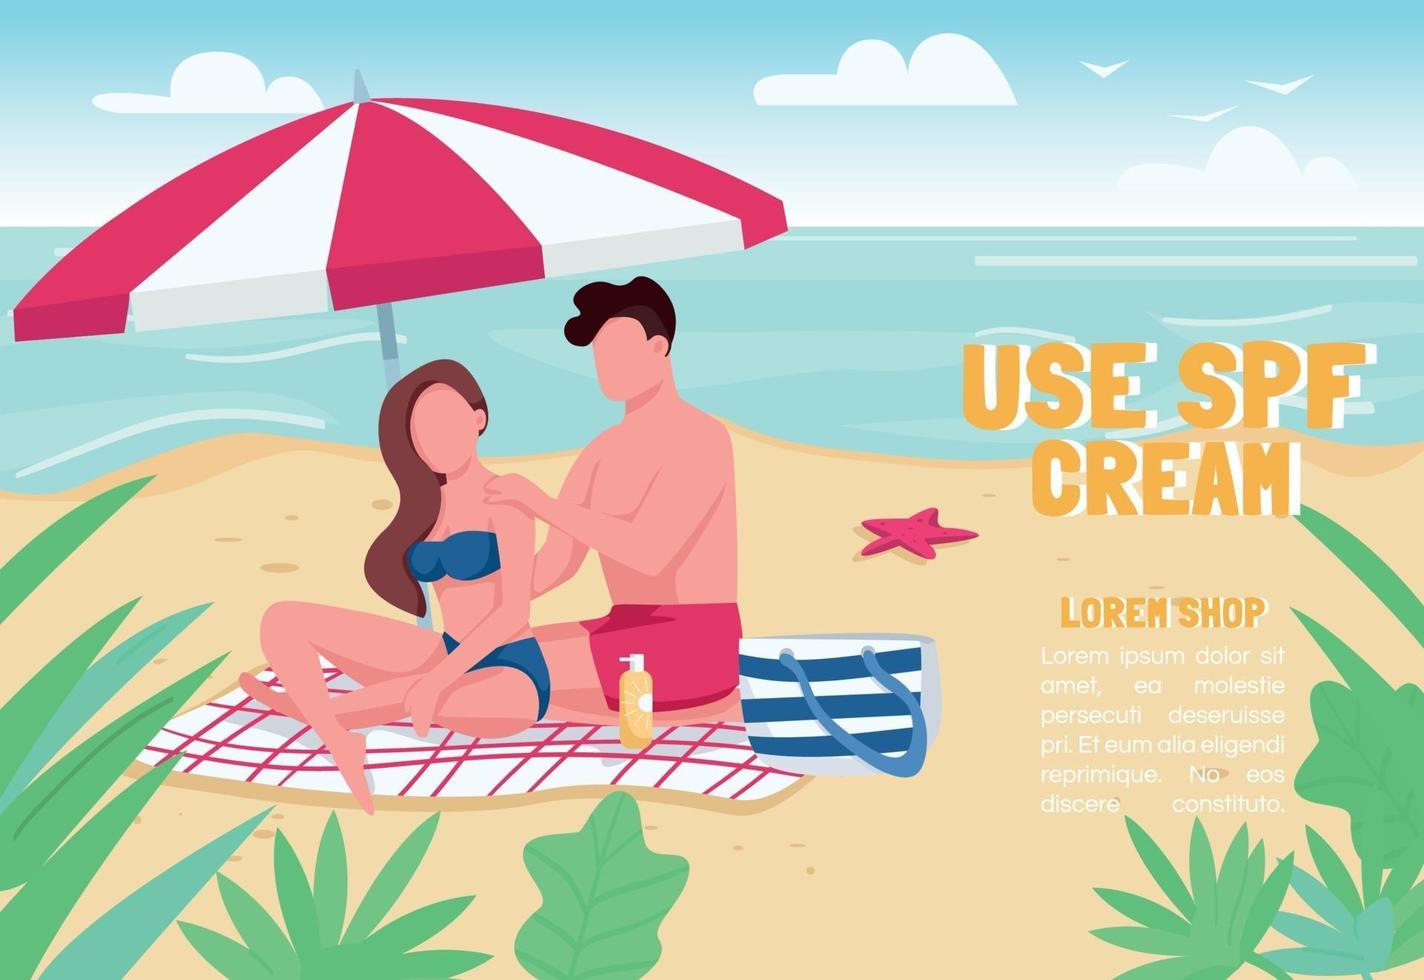 Use SPF cream banner flat vector template. Brochure, poster concept design with cartoon characters. Couple sunbathing, applying sunblock lotion horizontal flyer, leaflet with place for text